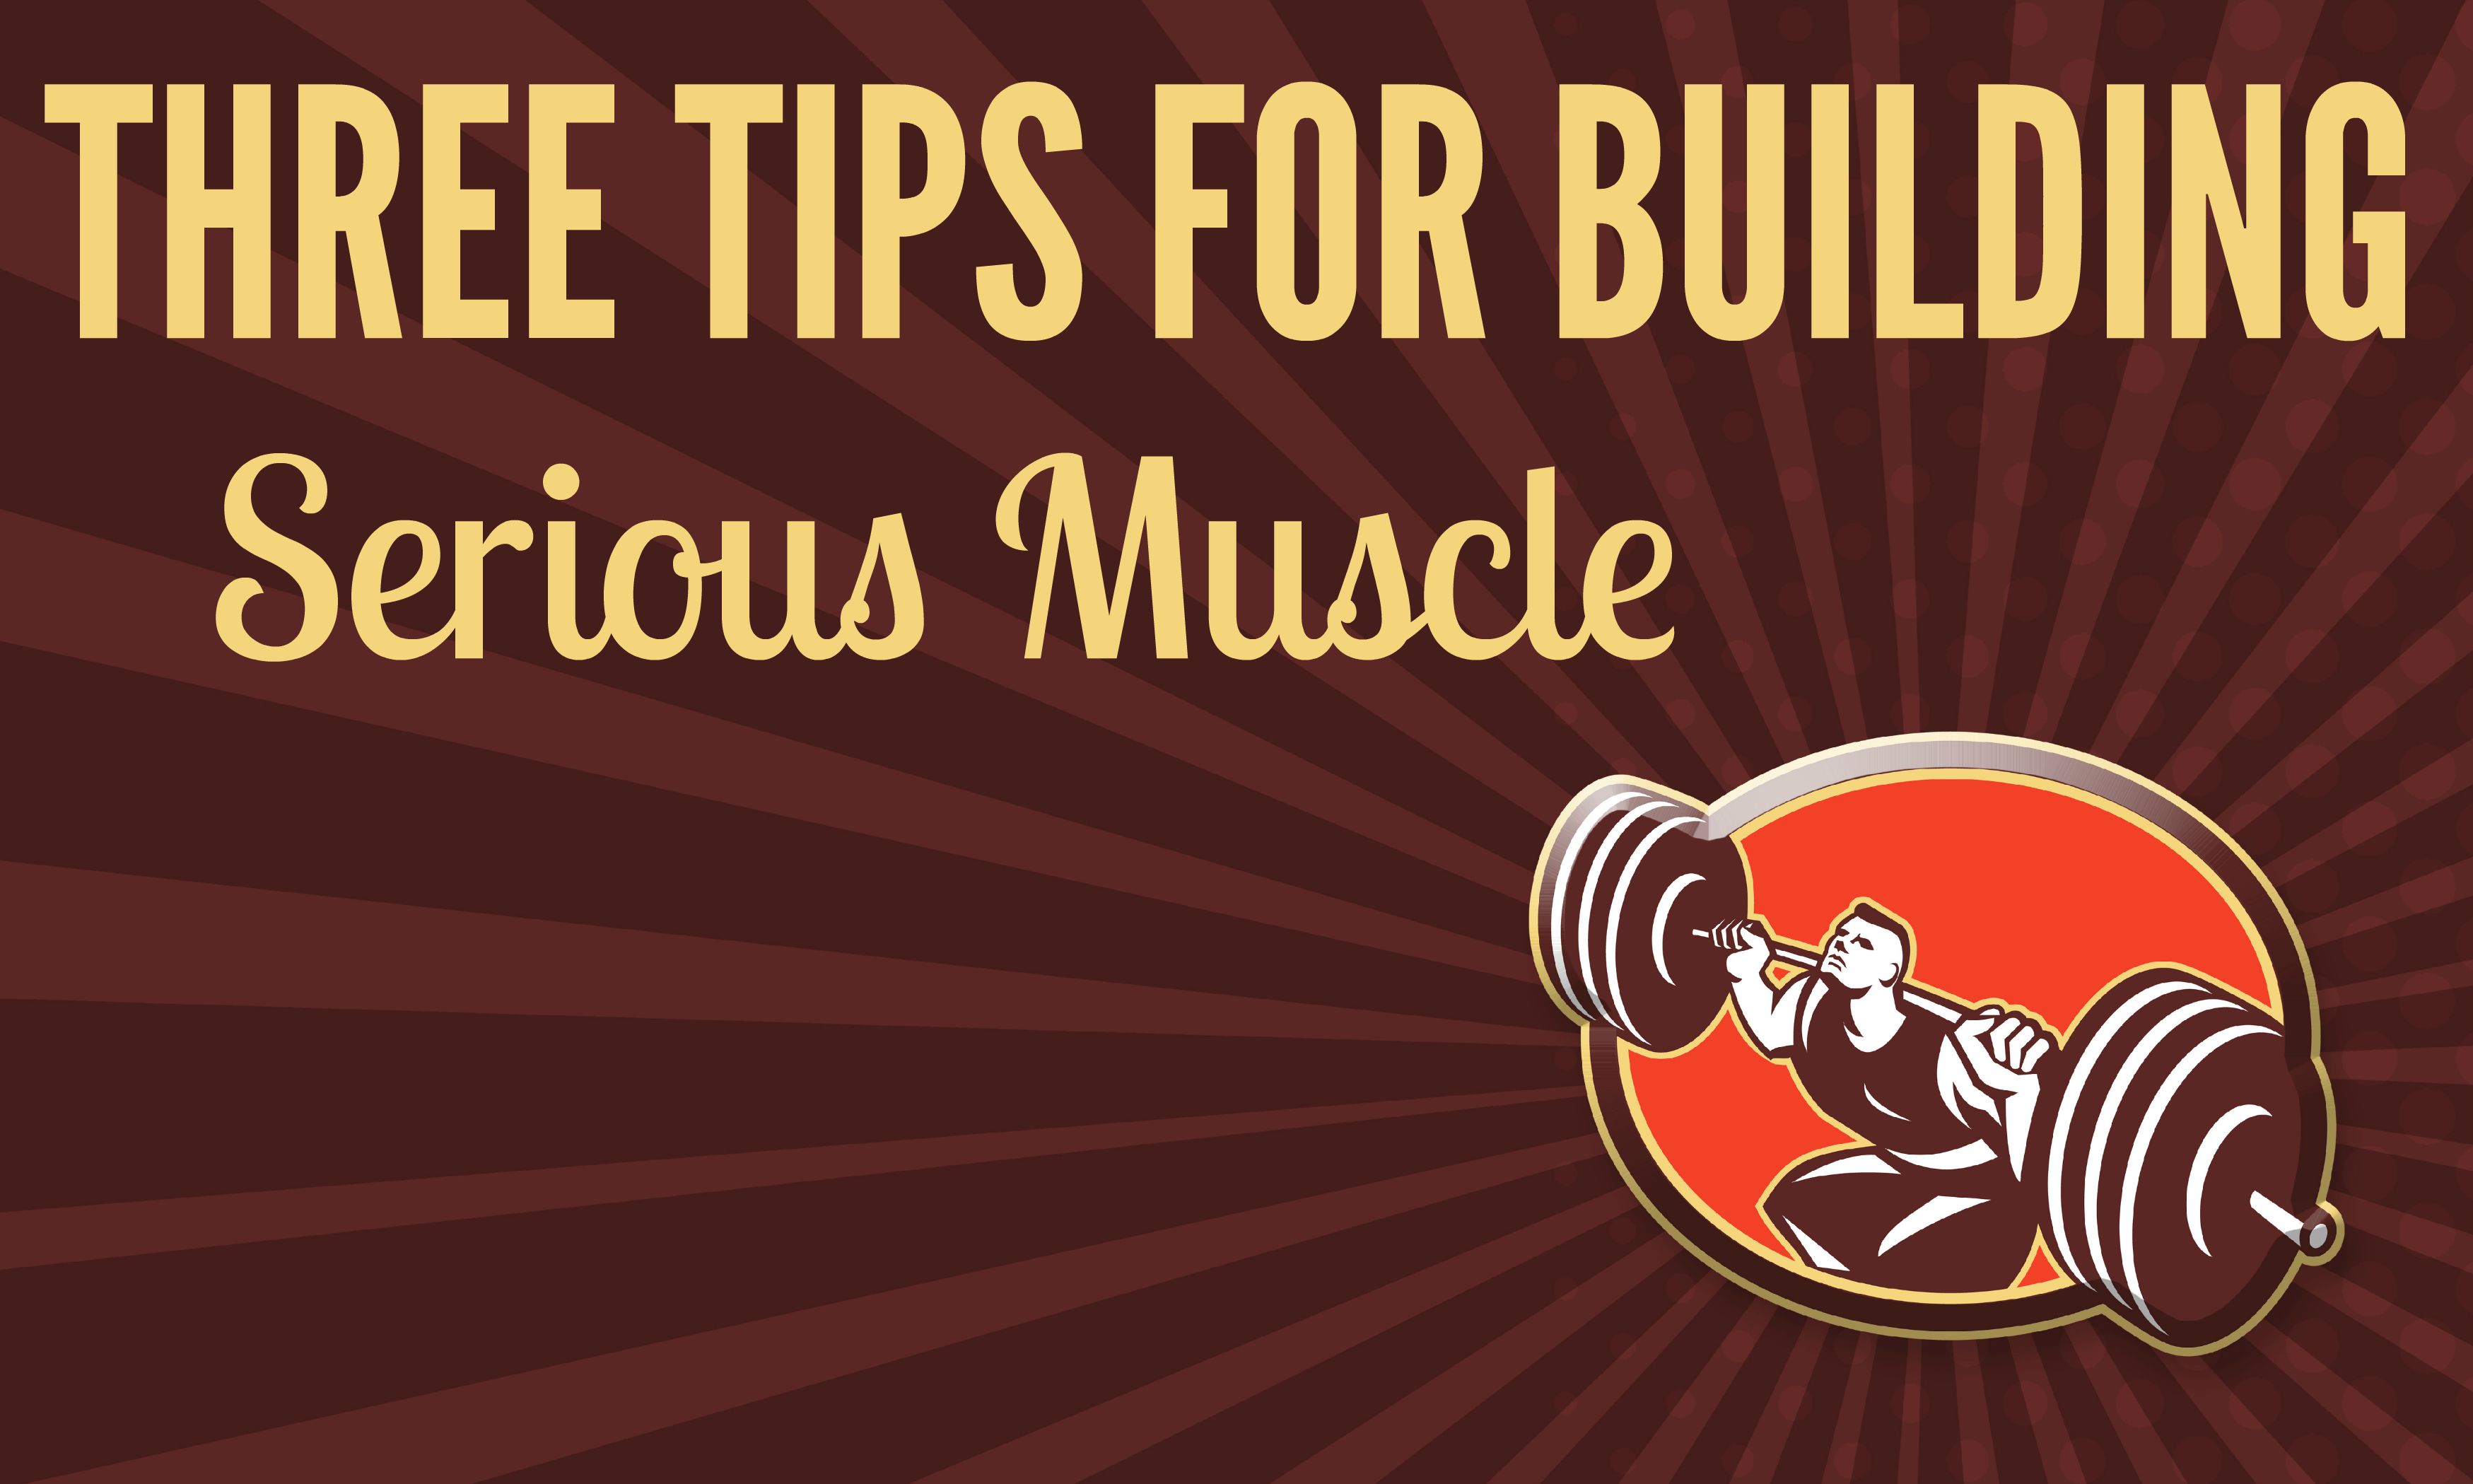 THREE TIPS FOR BUILDING MUSCLE